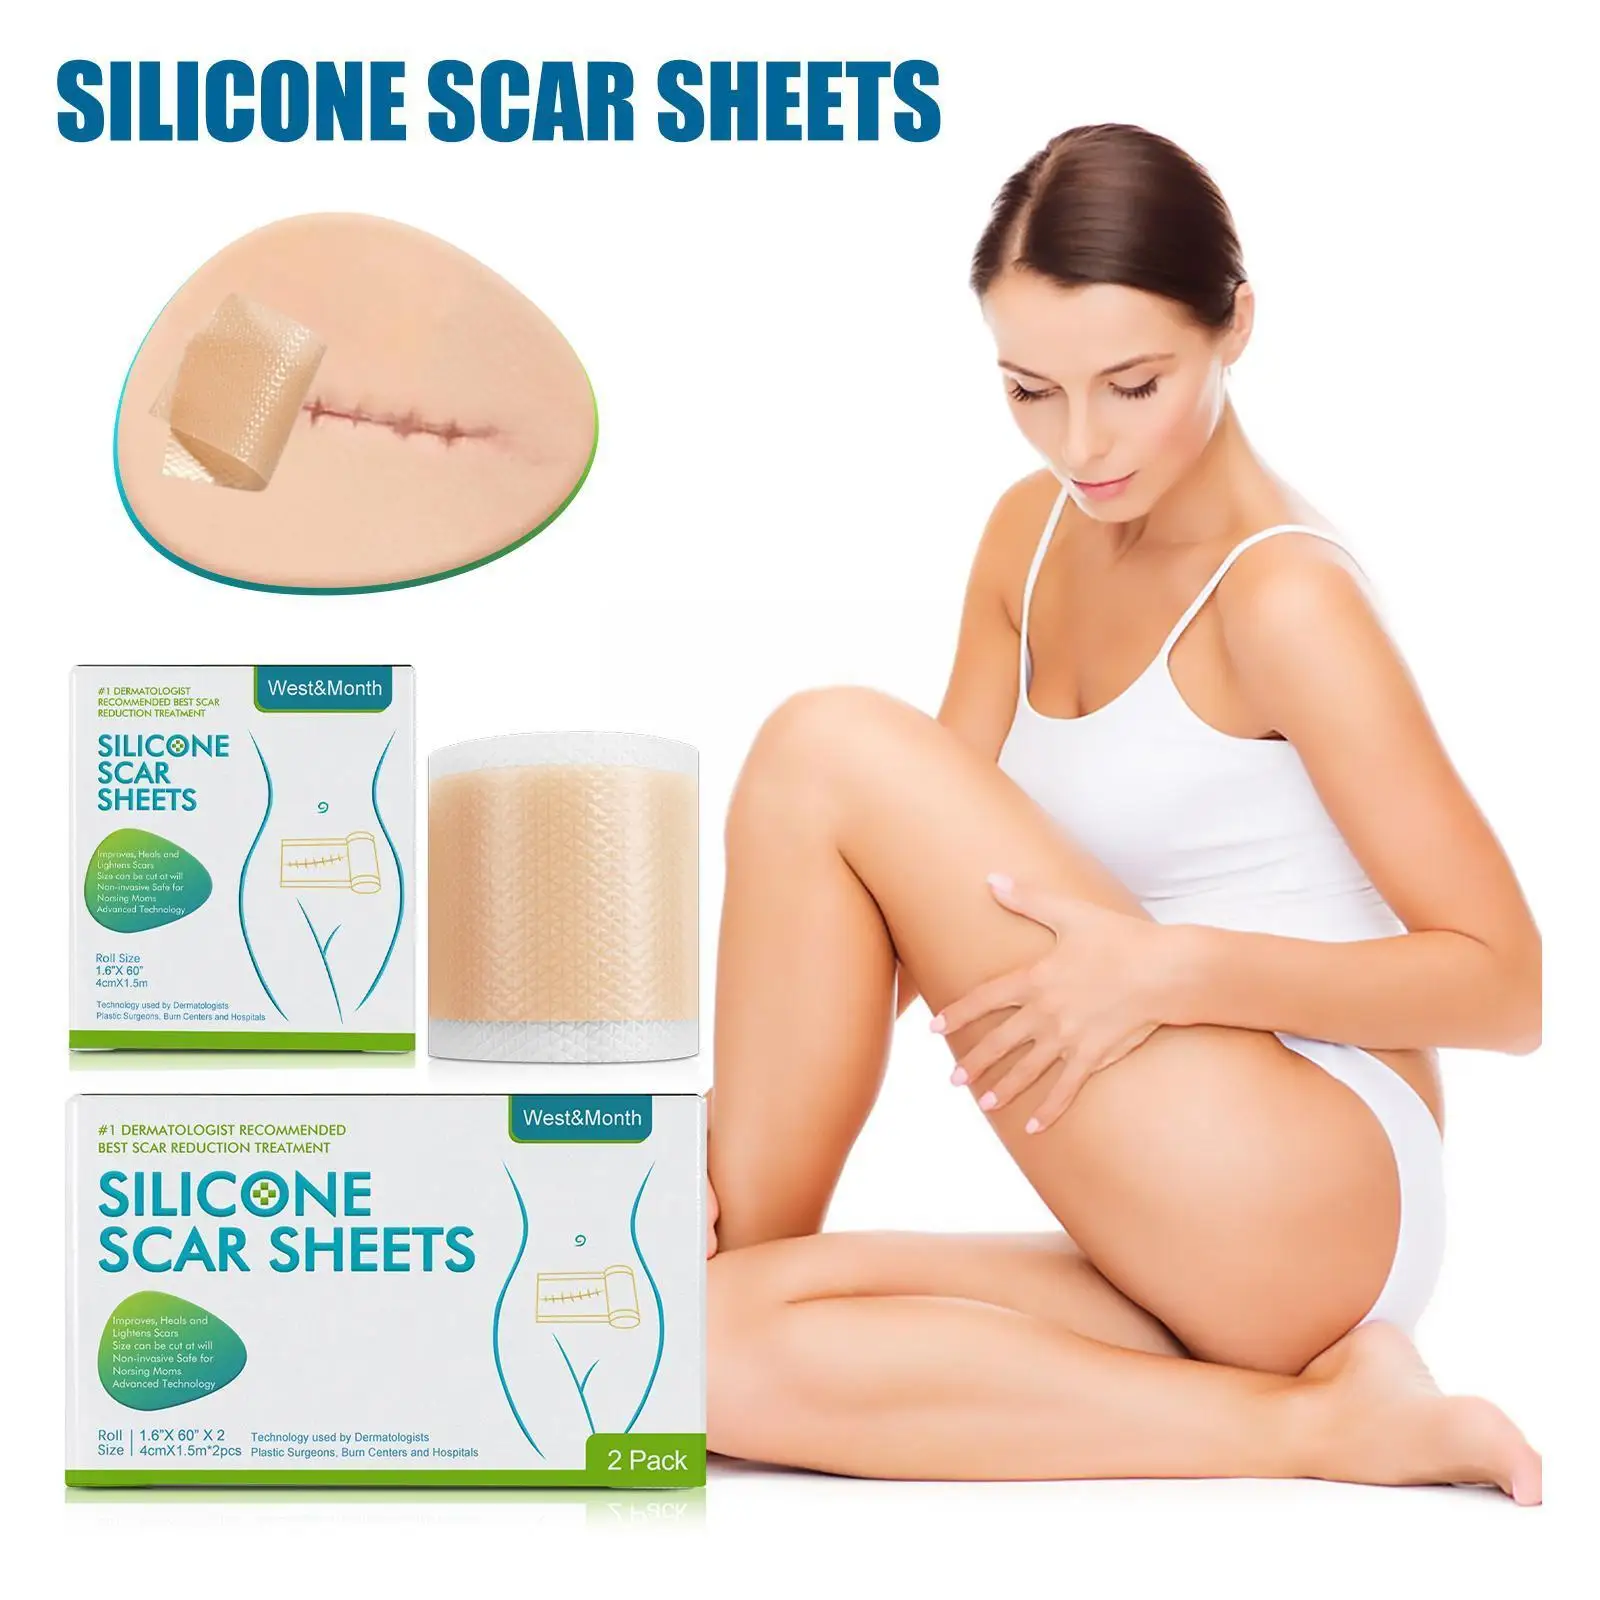 Silicone Scar Sheets Painless Scar Repair Tape Roll Effective Scar Removal Strips For C-Section Keloid Surgery Burn Acne 4x I6Y9